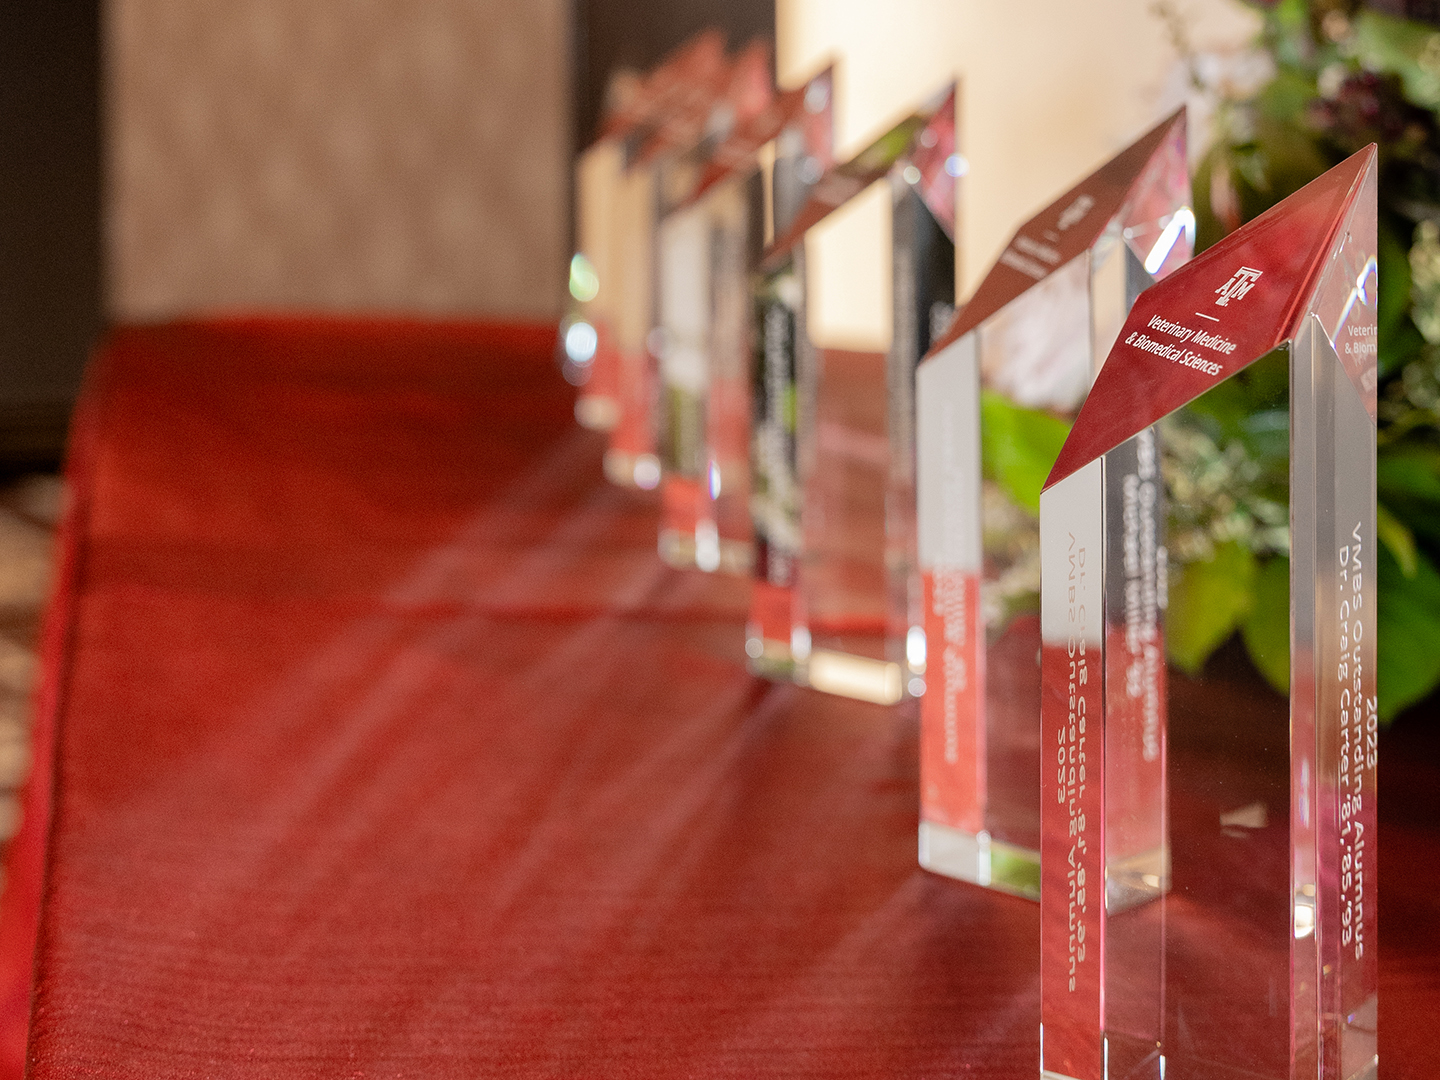 The outstanding alumni awards lined up in a row